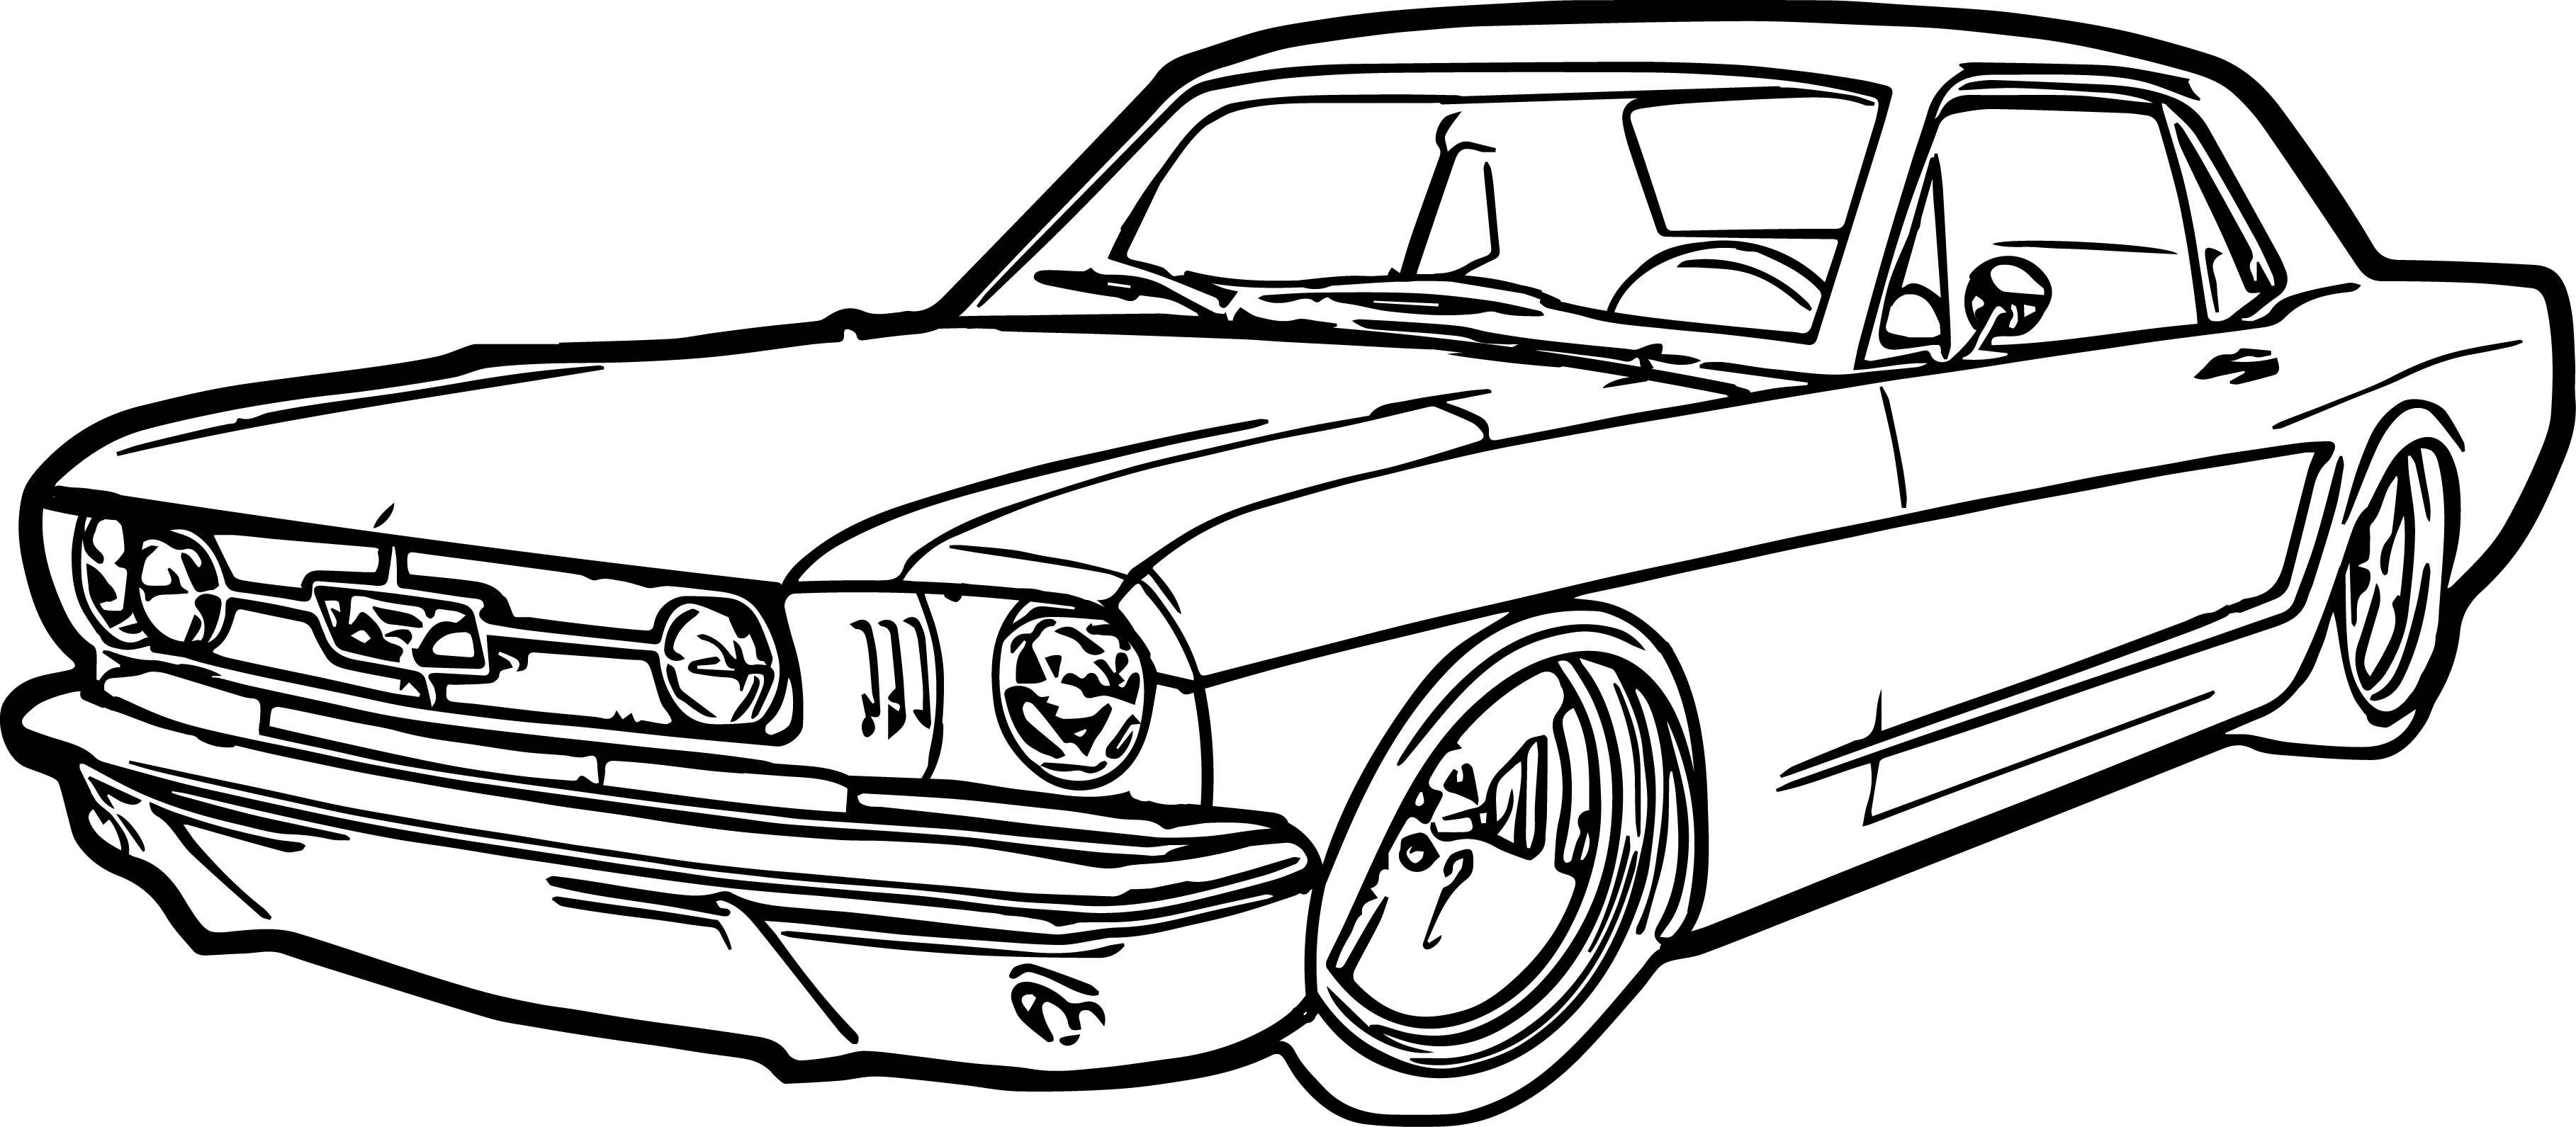 Jdm Car Drawings | Free download on ClipArtMag